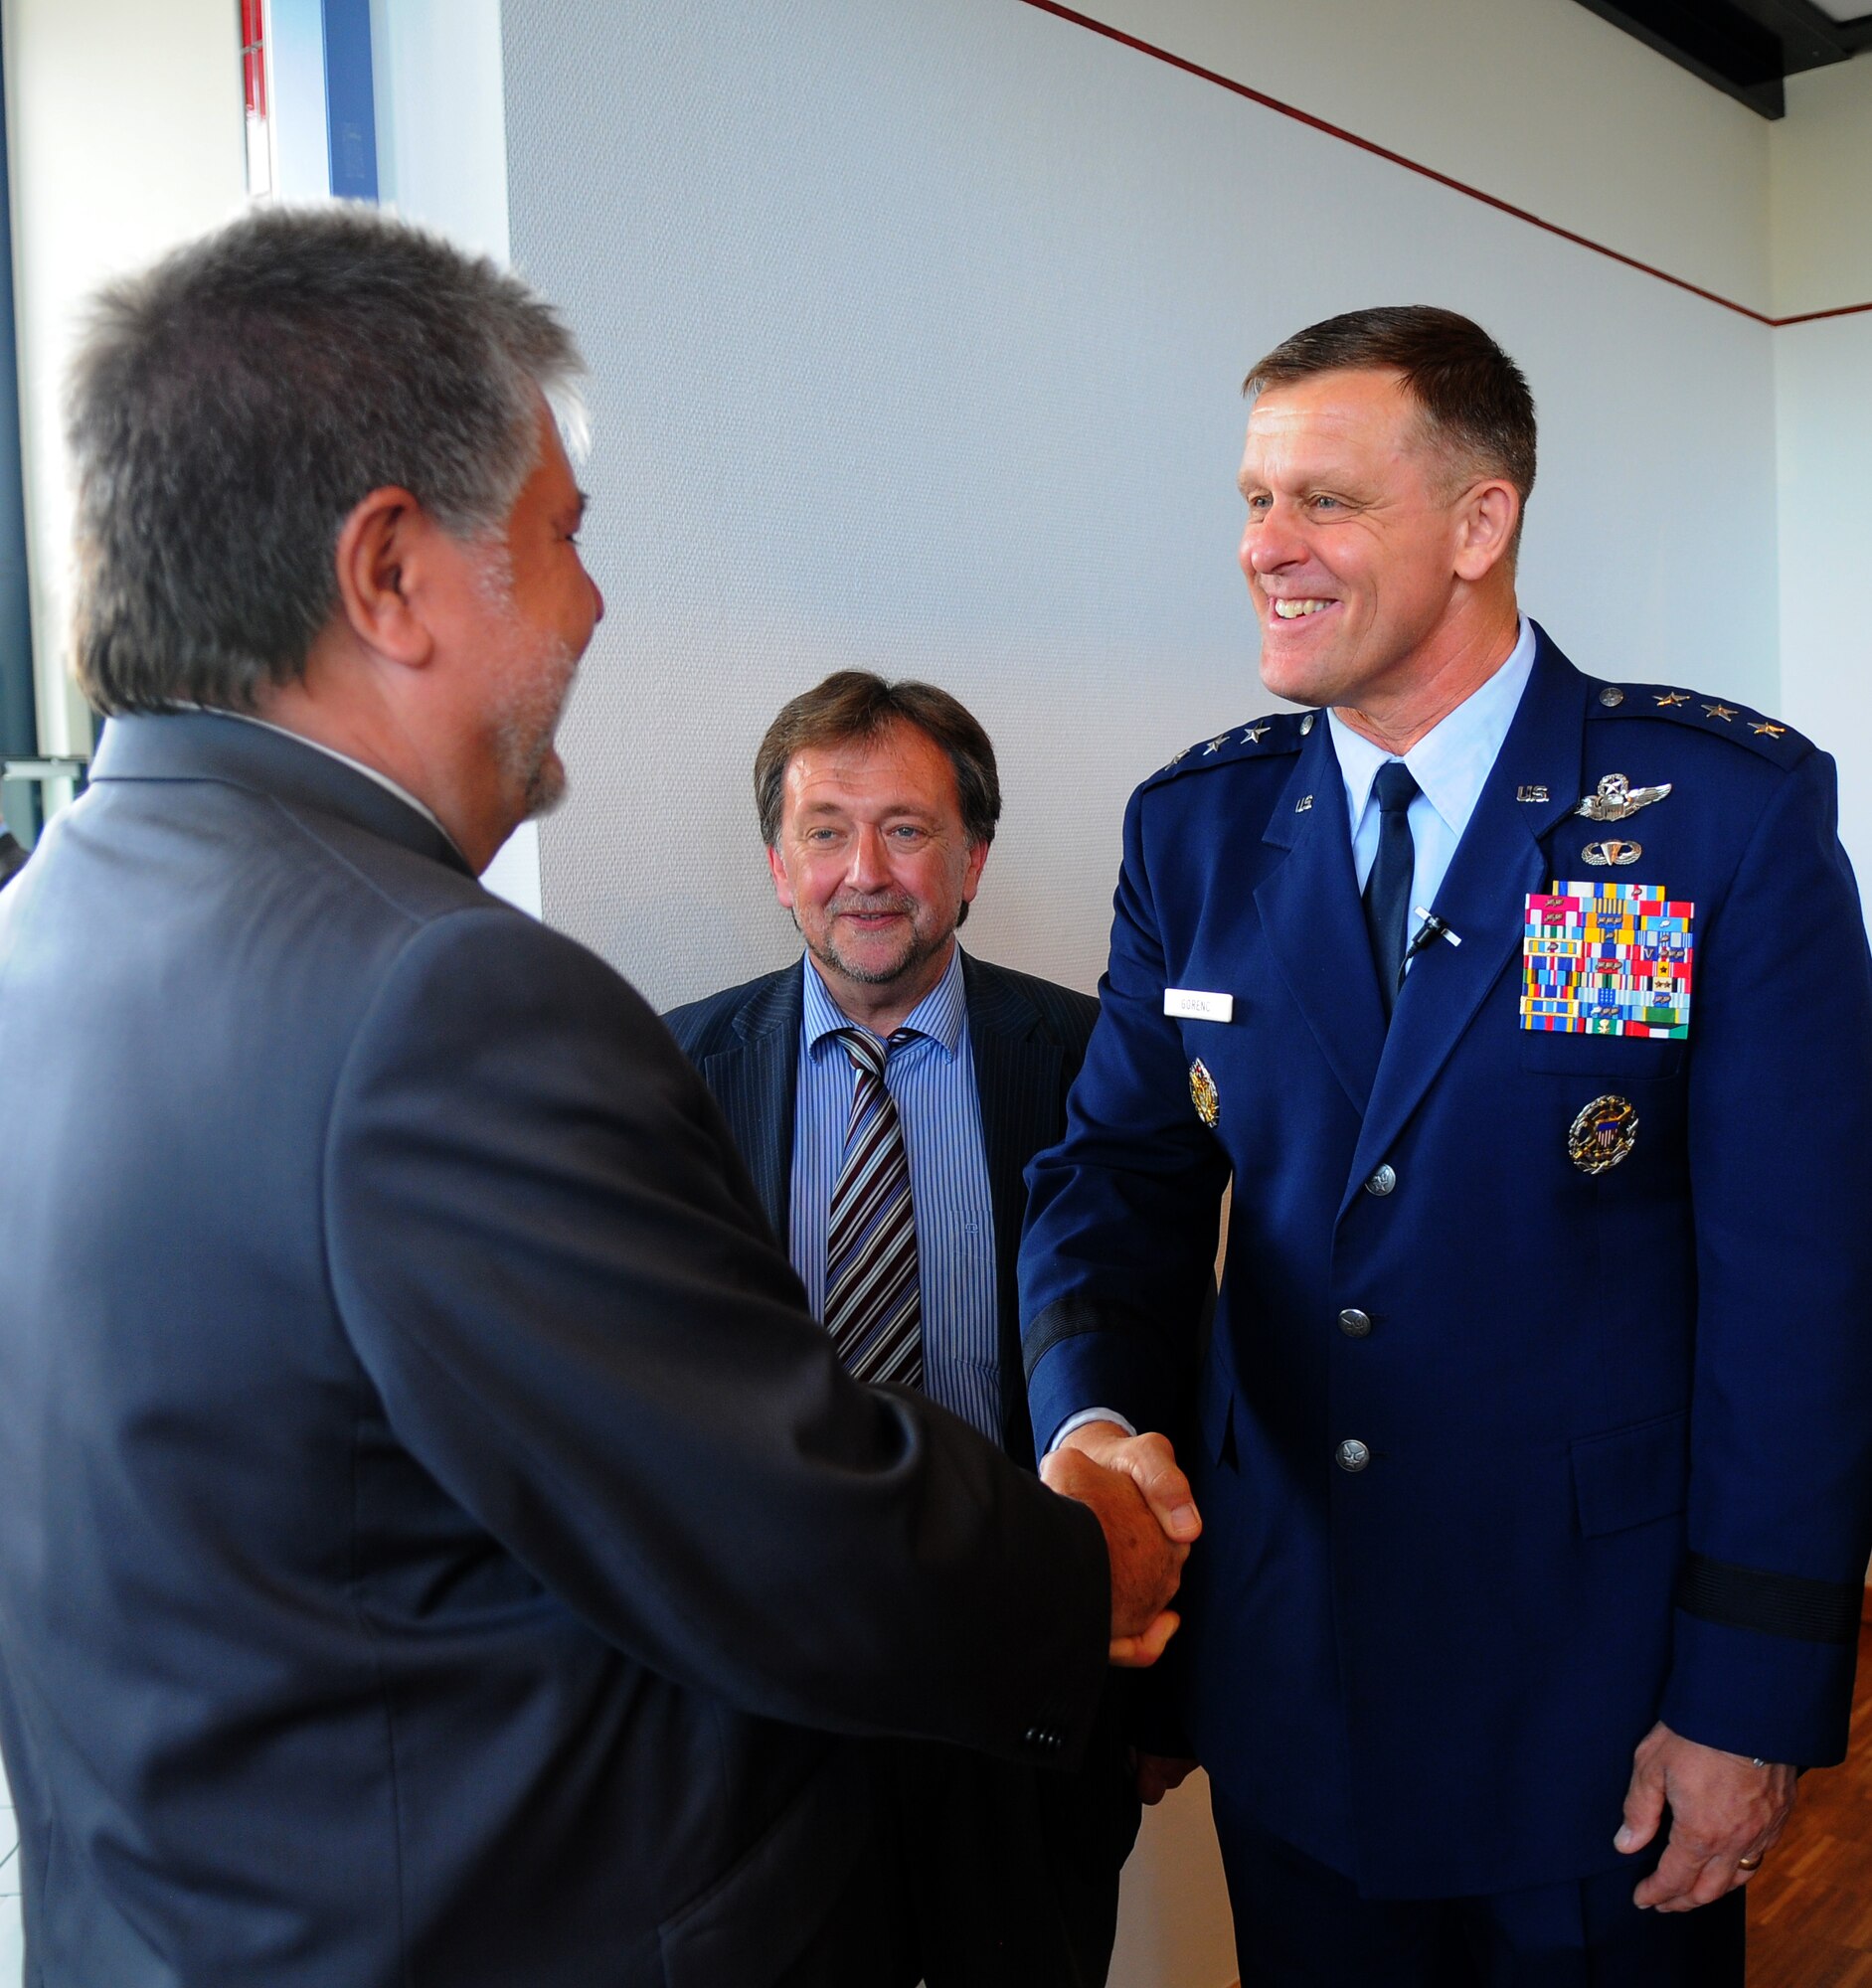 PRUEM, Germany – Lt. Gen. Frank Gorenc, 3rd Air Force commander, greets Kurt Beck, Rheinland-Pfalz minister president, at a military reception hosted by the 52nd Fighter Wing following a tour of the Rheinland-Pfalz Day Fair in Pruem, Germany, May 28. The Rheinland-Pfalz Day Fair is a three-day festival with entertainment, informational booths and other attractions. (U.S. Air Force photo/Airman 1st Class Dillon Davis)